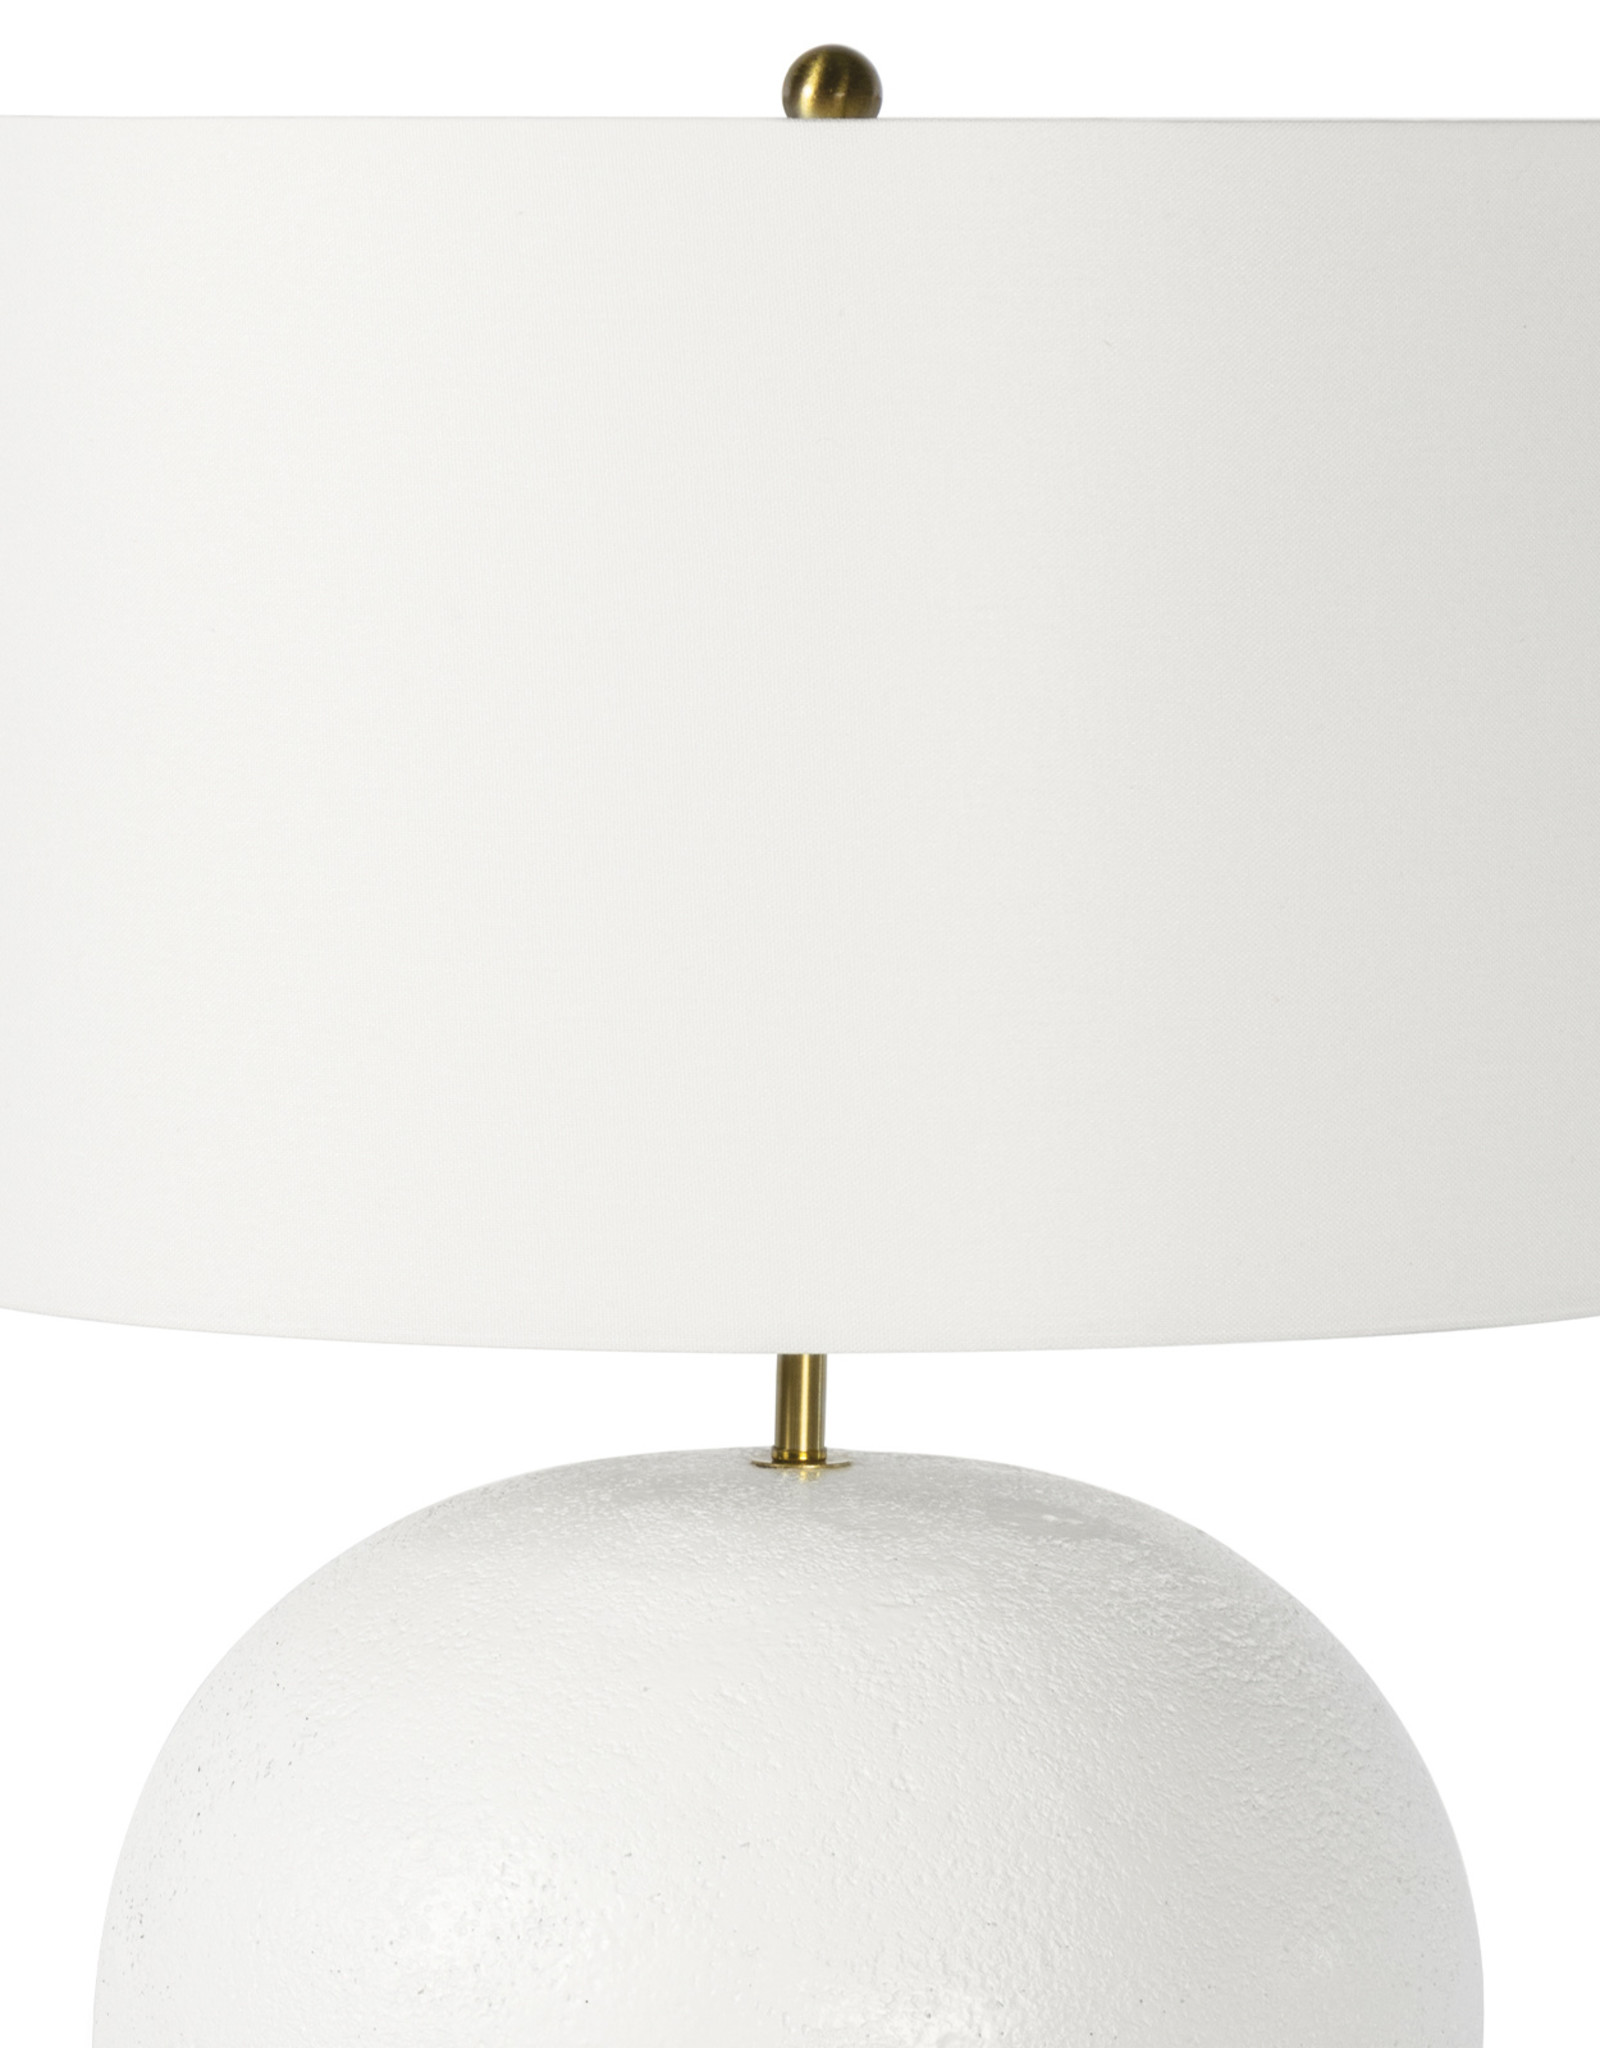 Southern Living Blanche Concrete Table Lamp